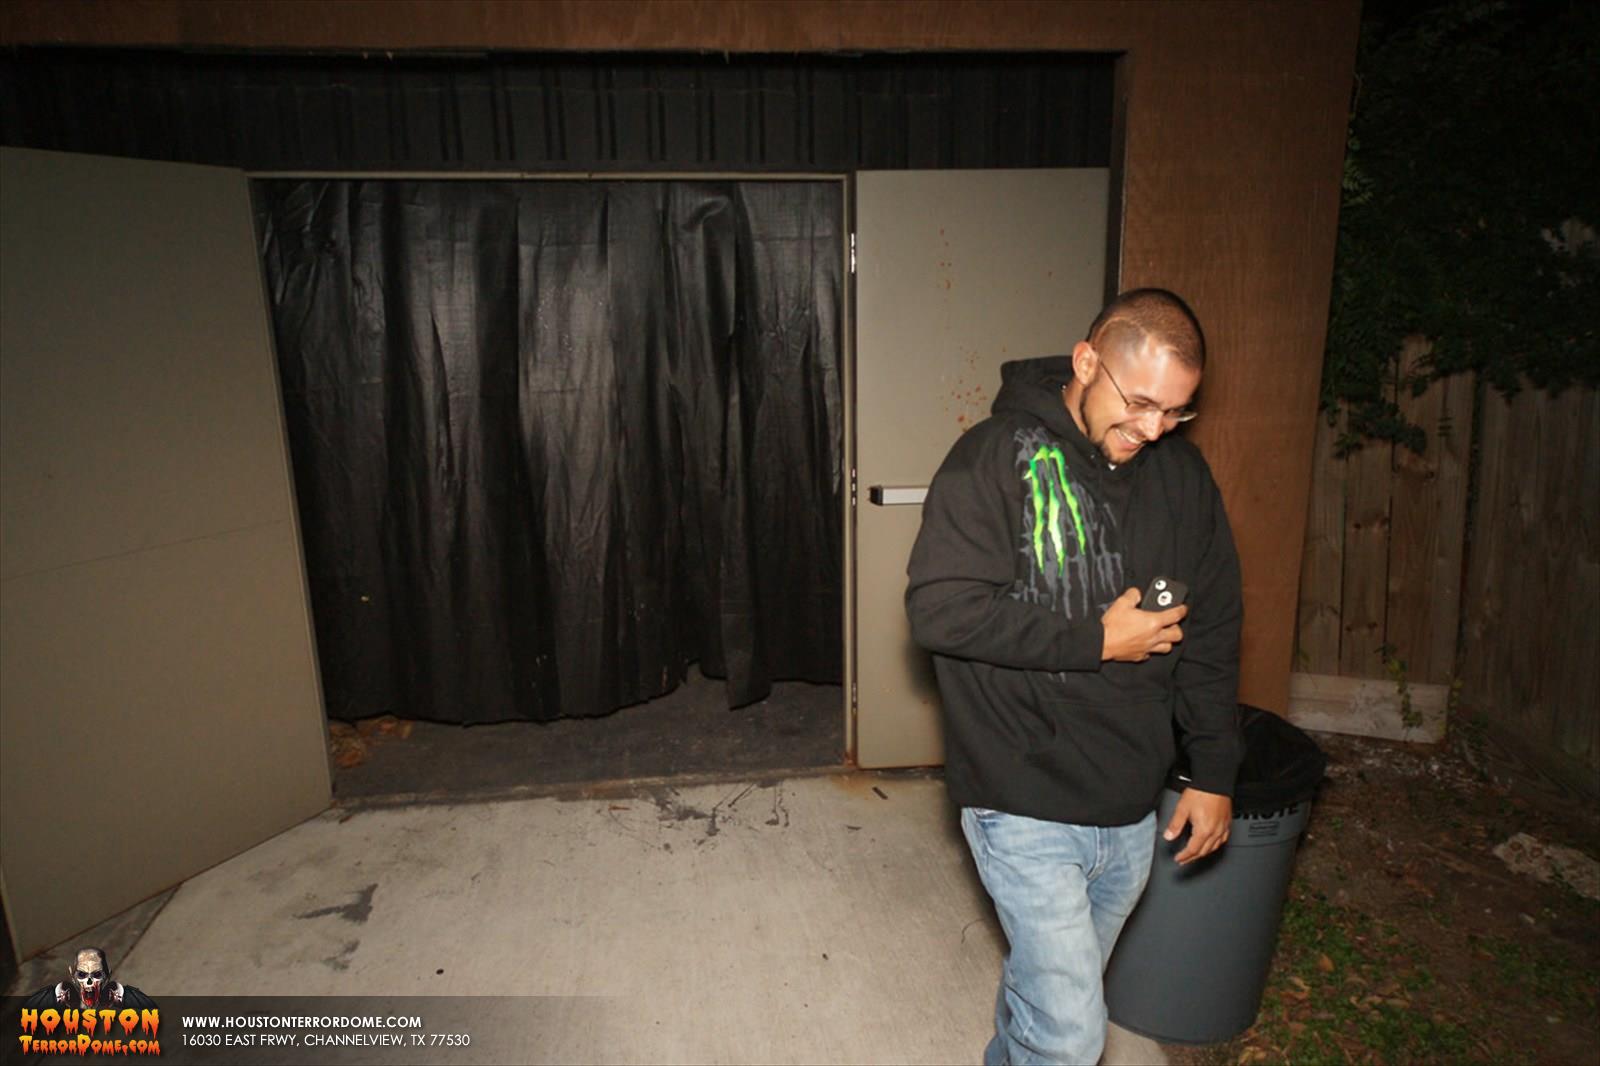 Visitor exiting the haunted house.